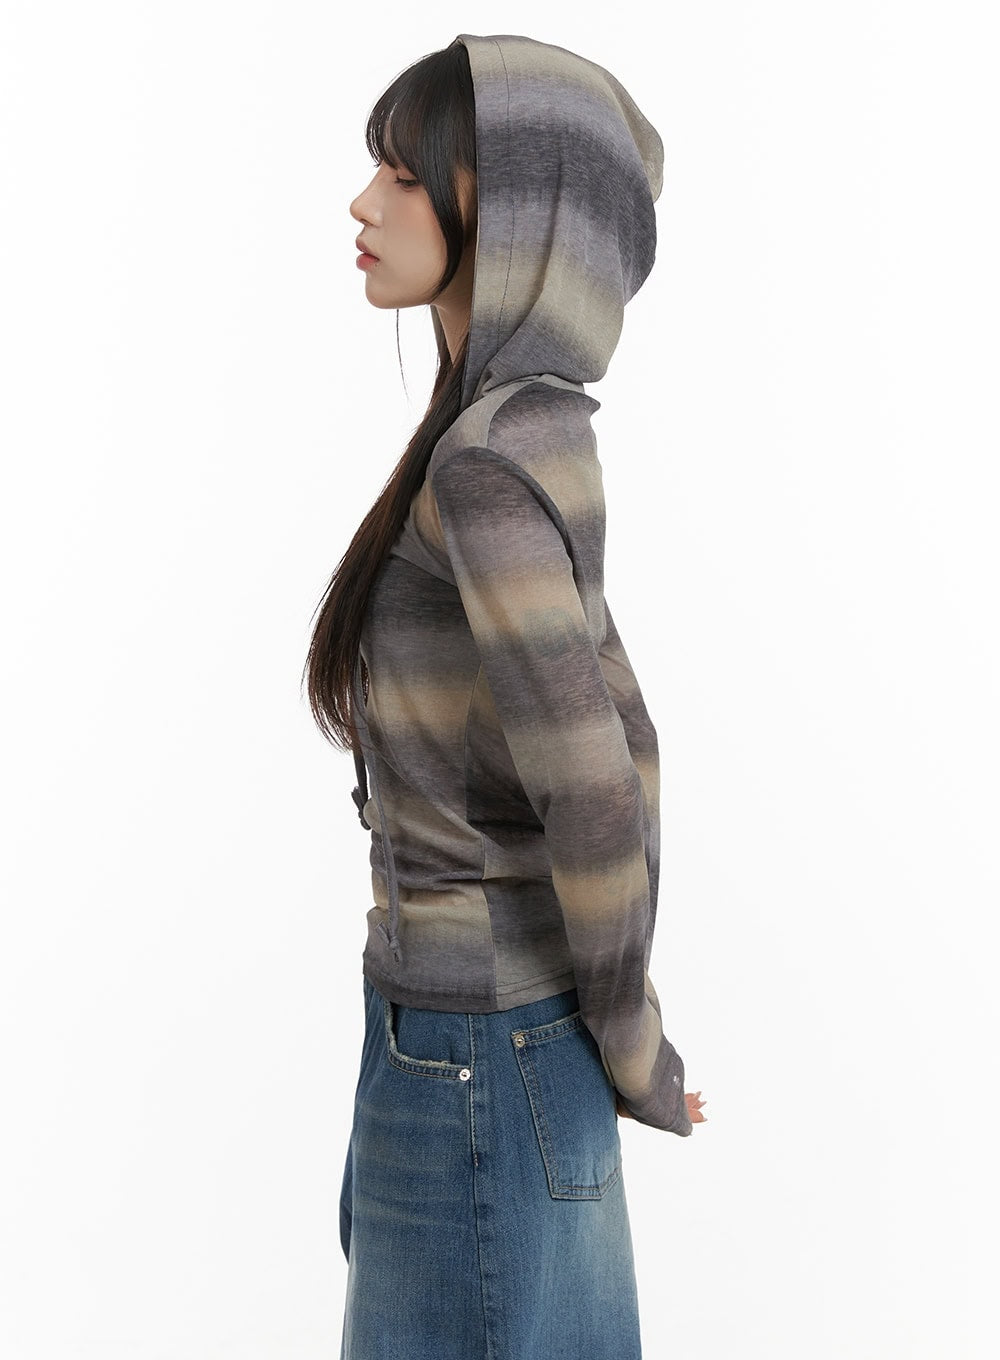 gradient-striped-hooded-top-ca426